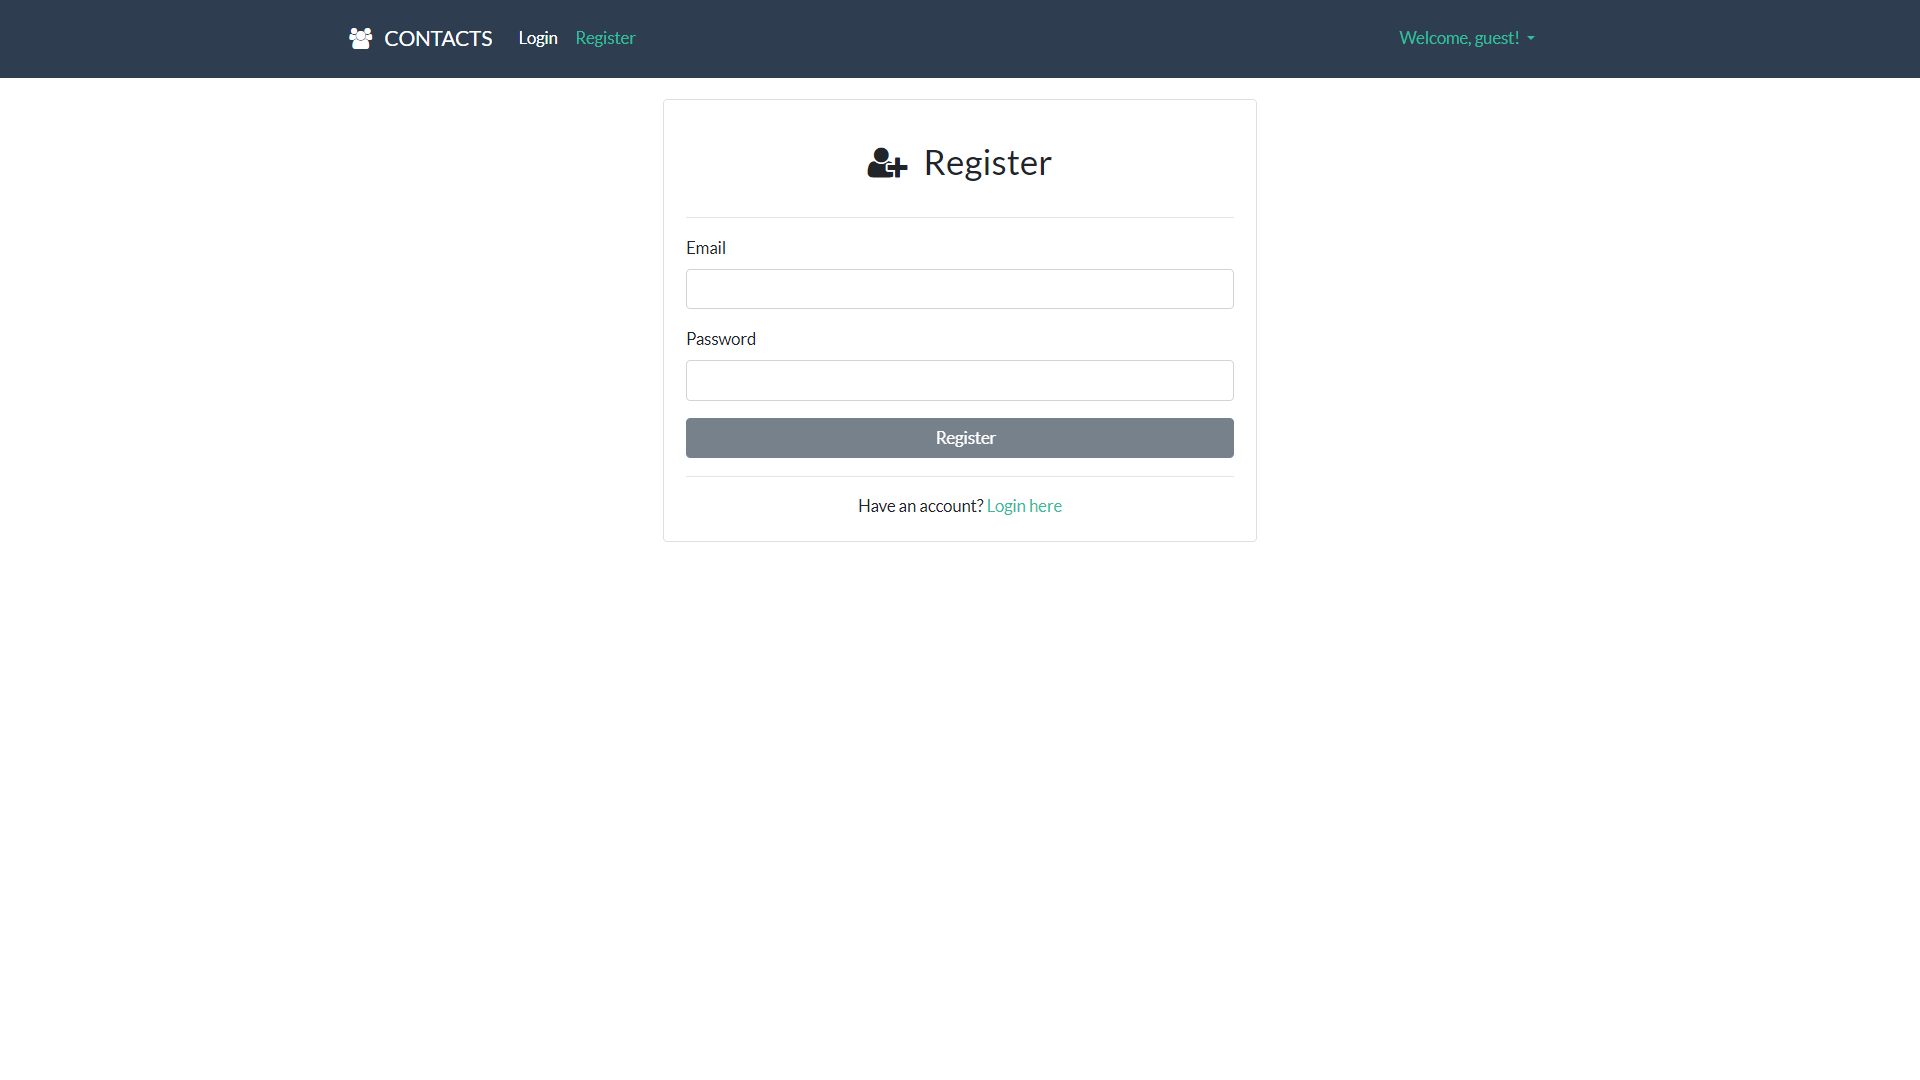 Register Page